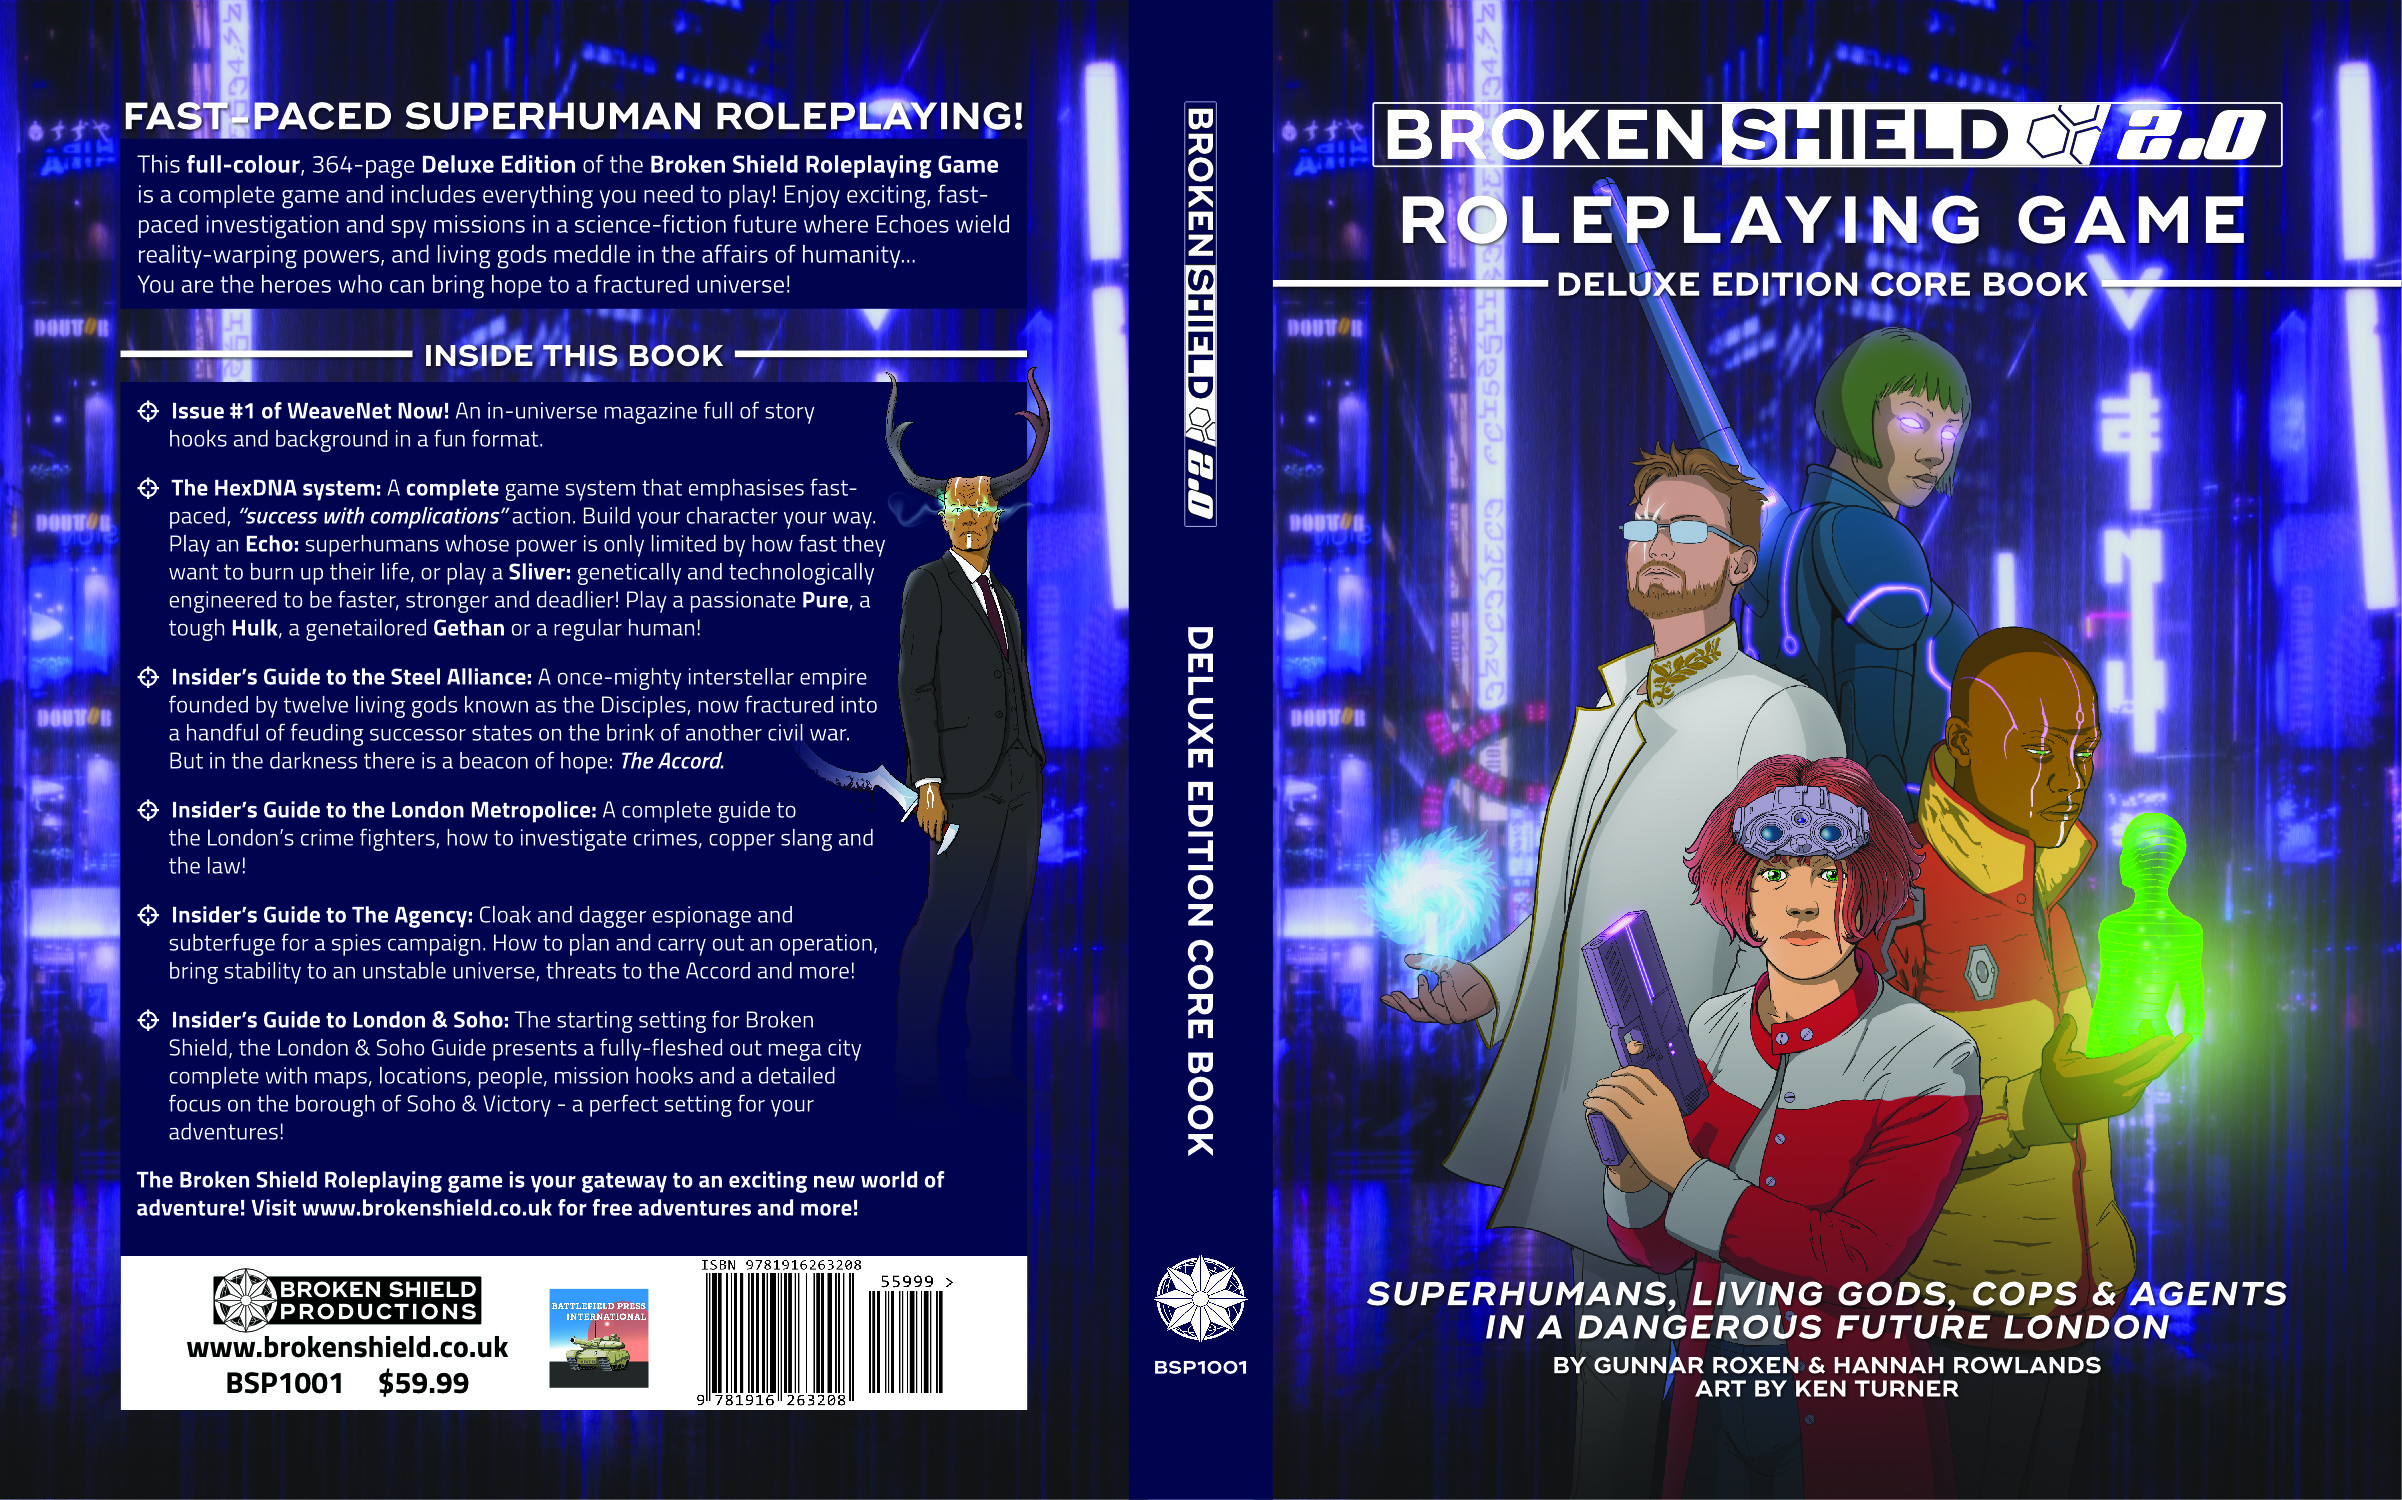 The Broken Shield Roleplaying Game: Deluxe Edition Core Book